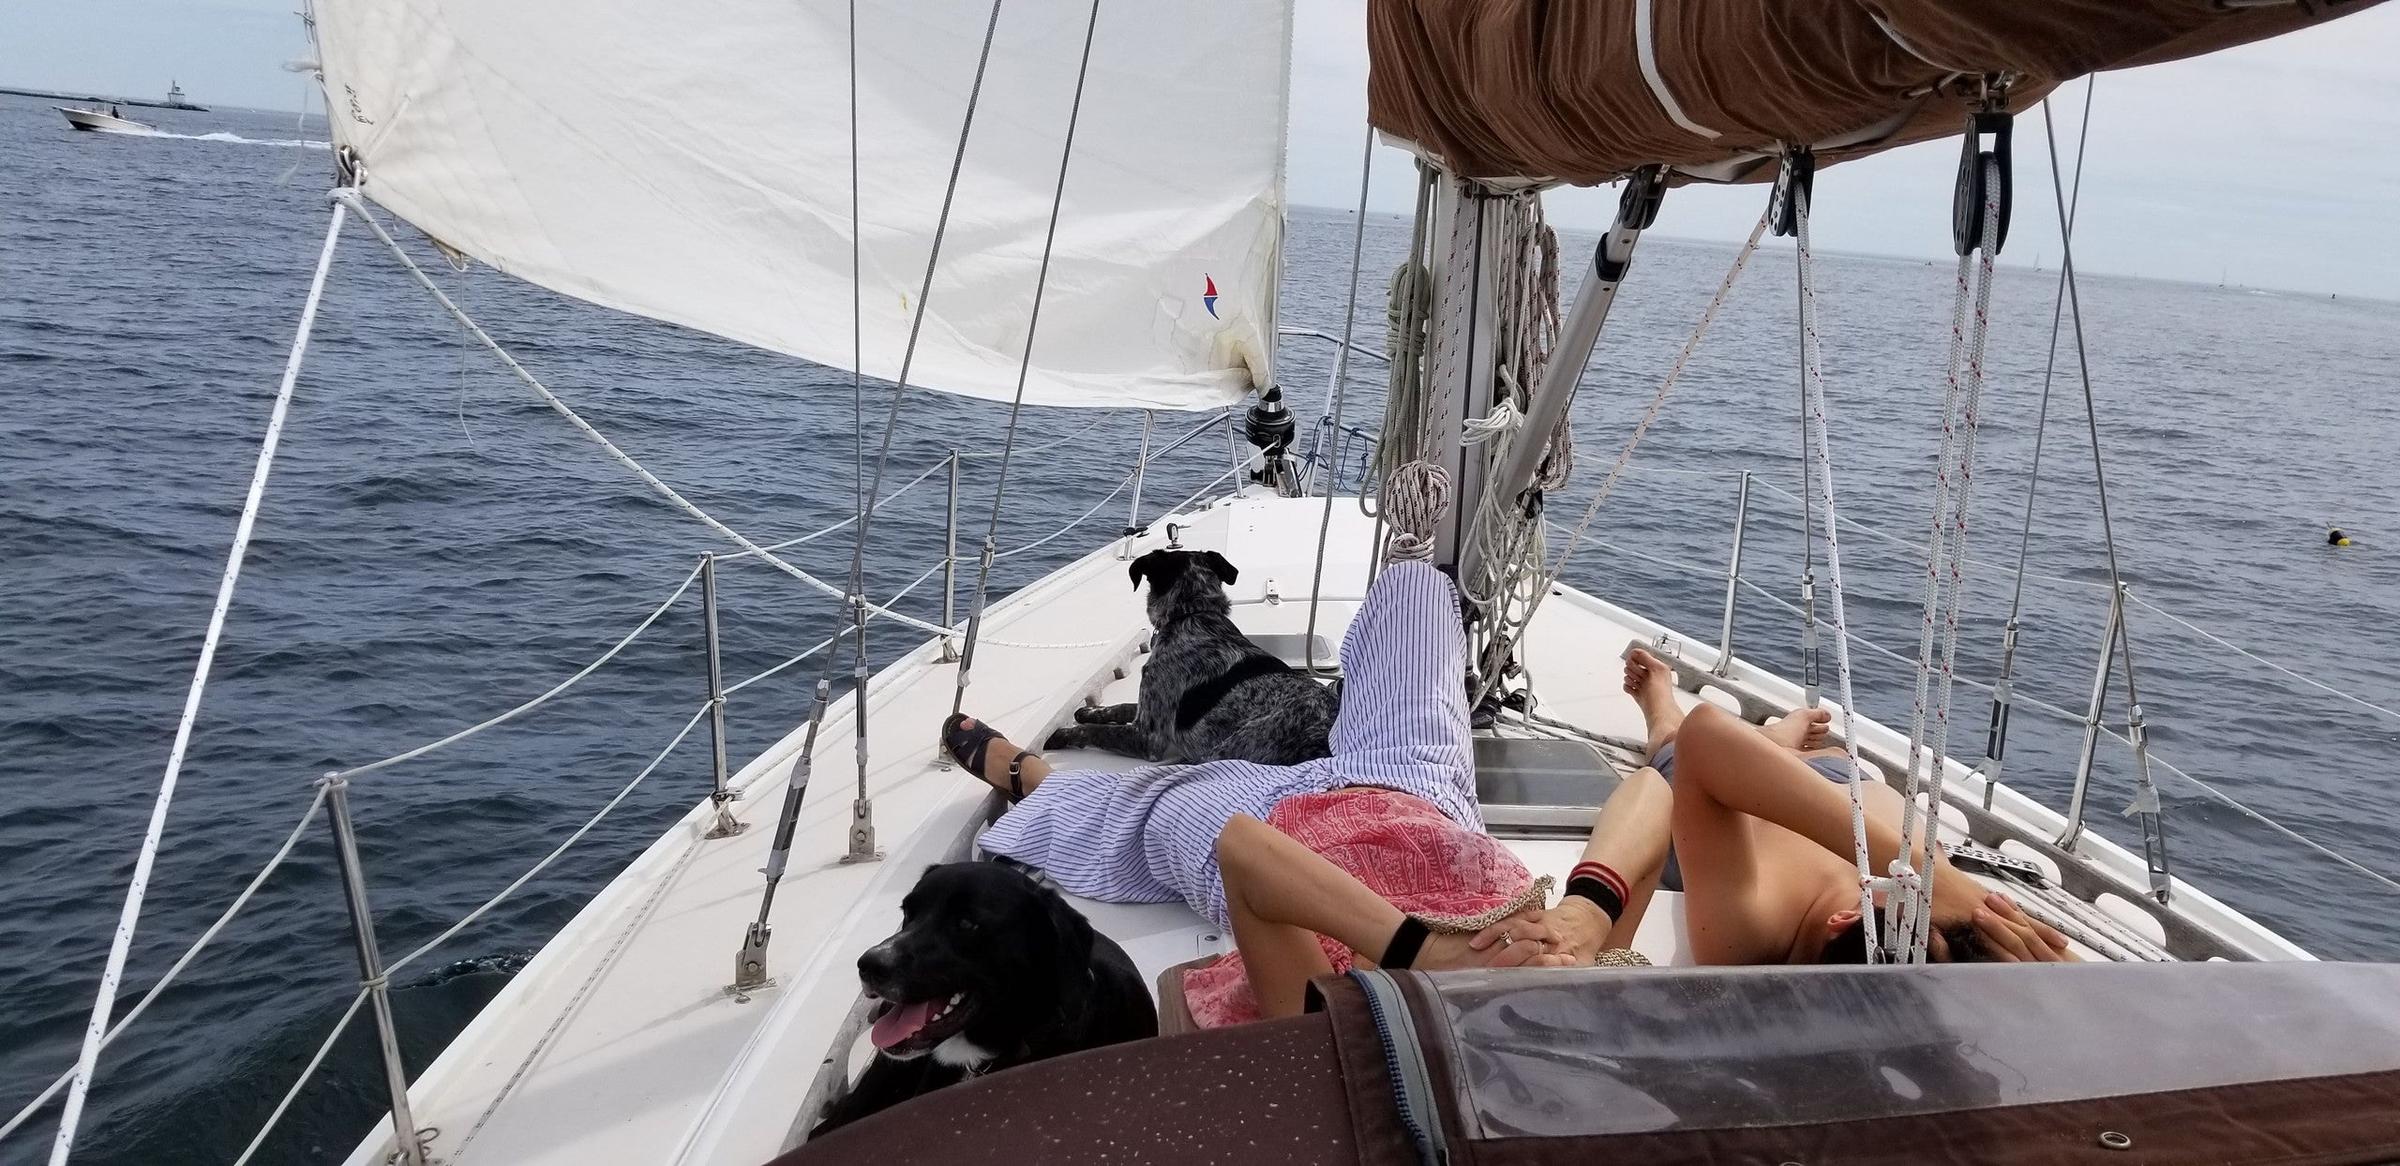 Pet Friendly Sailing Adventure for Up to 6 People